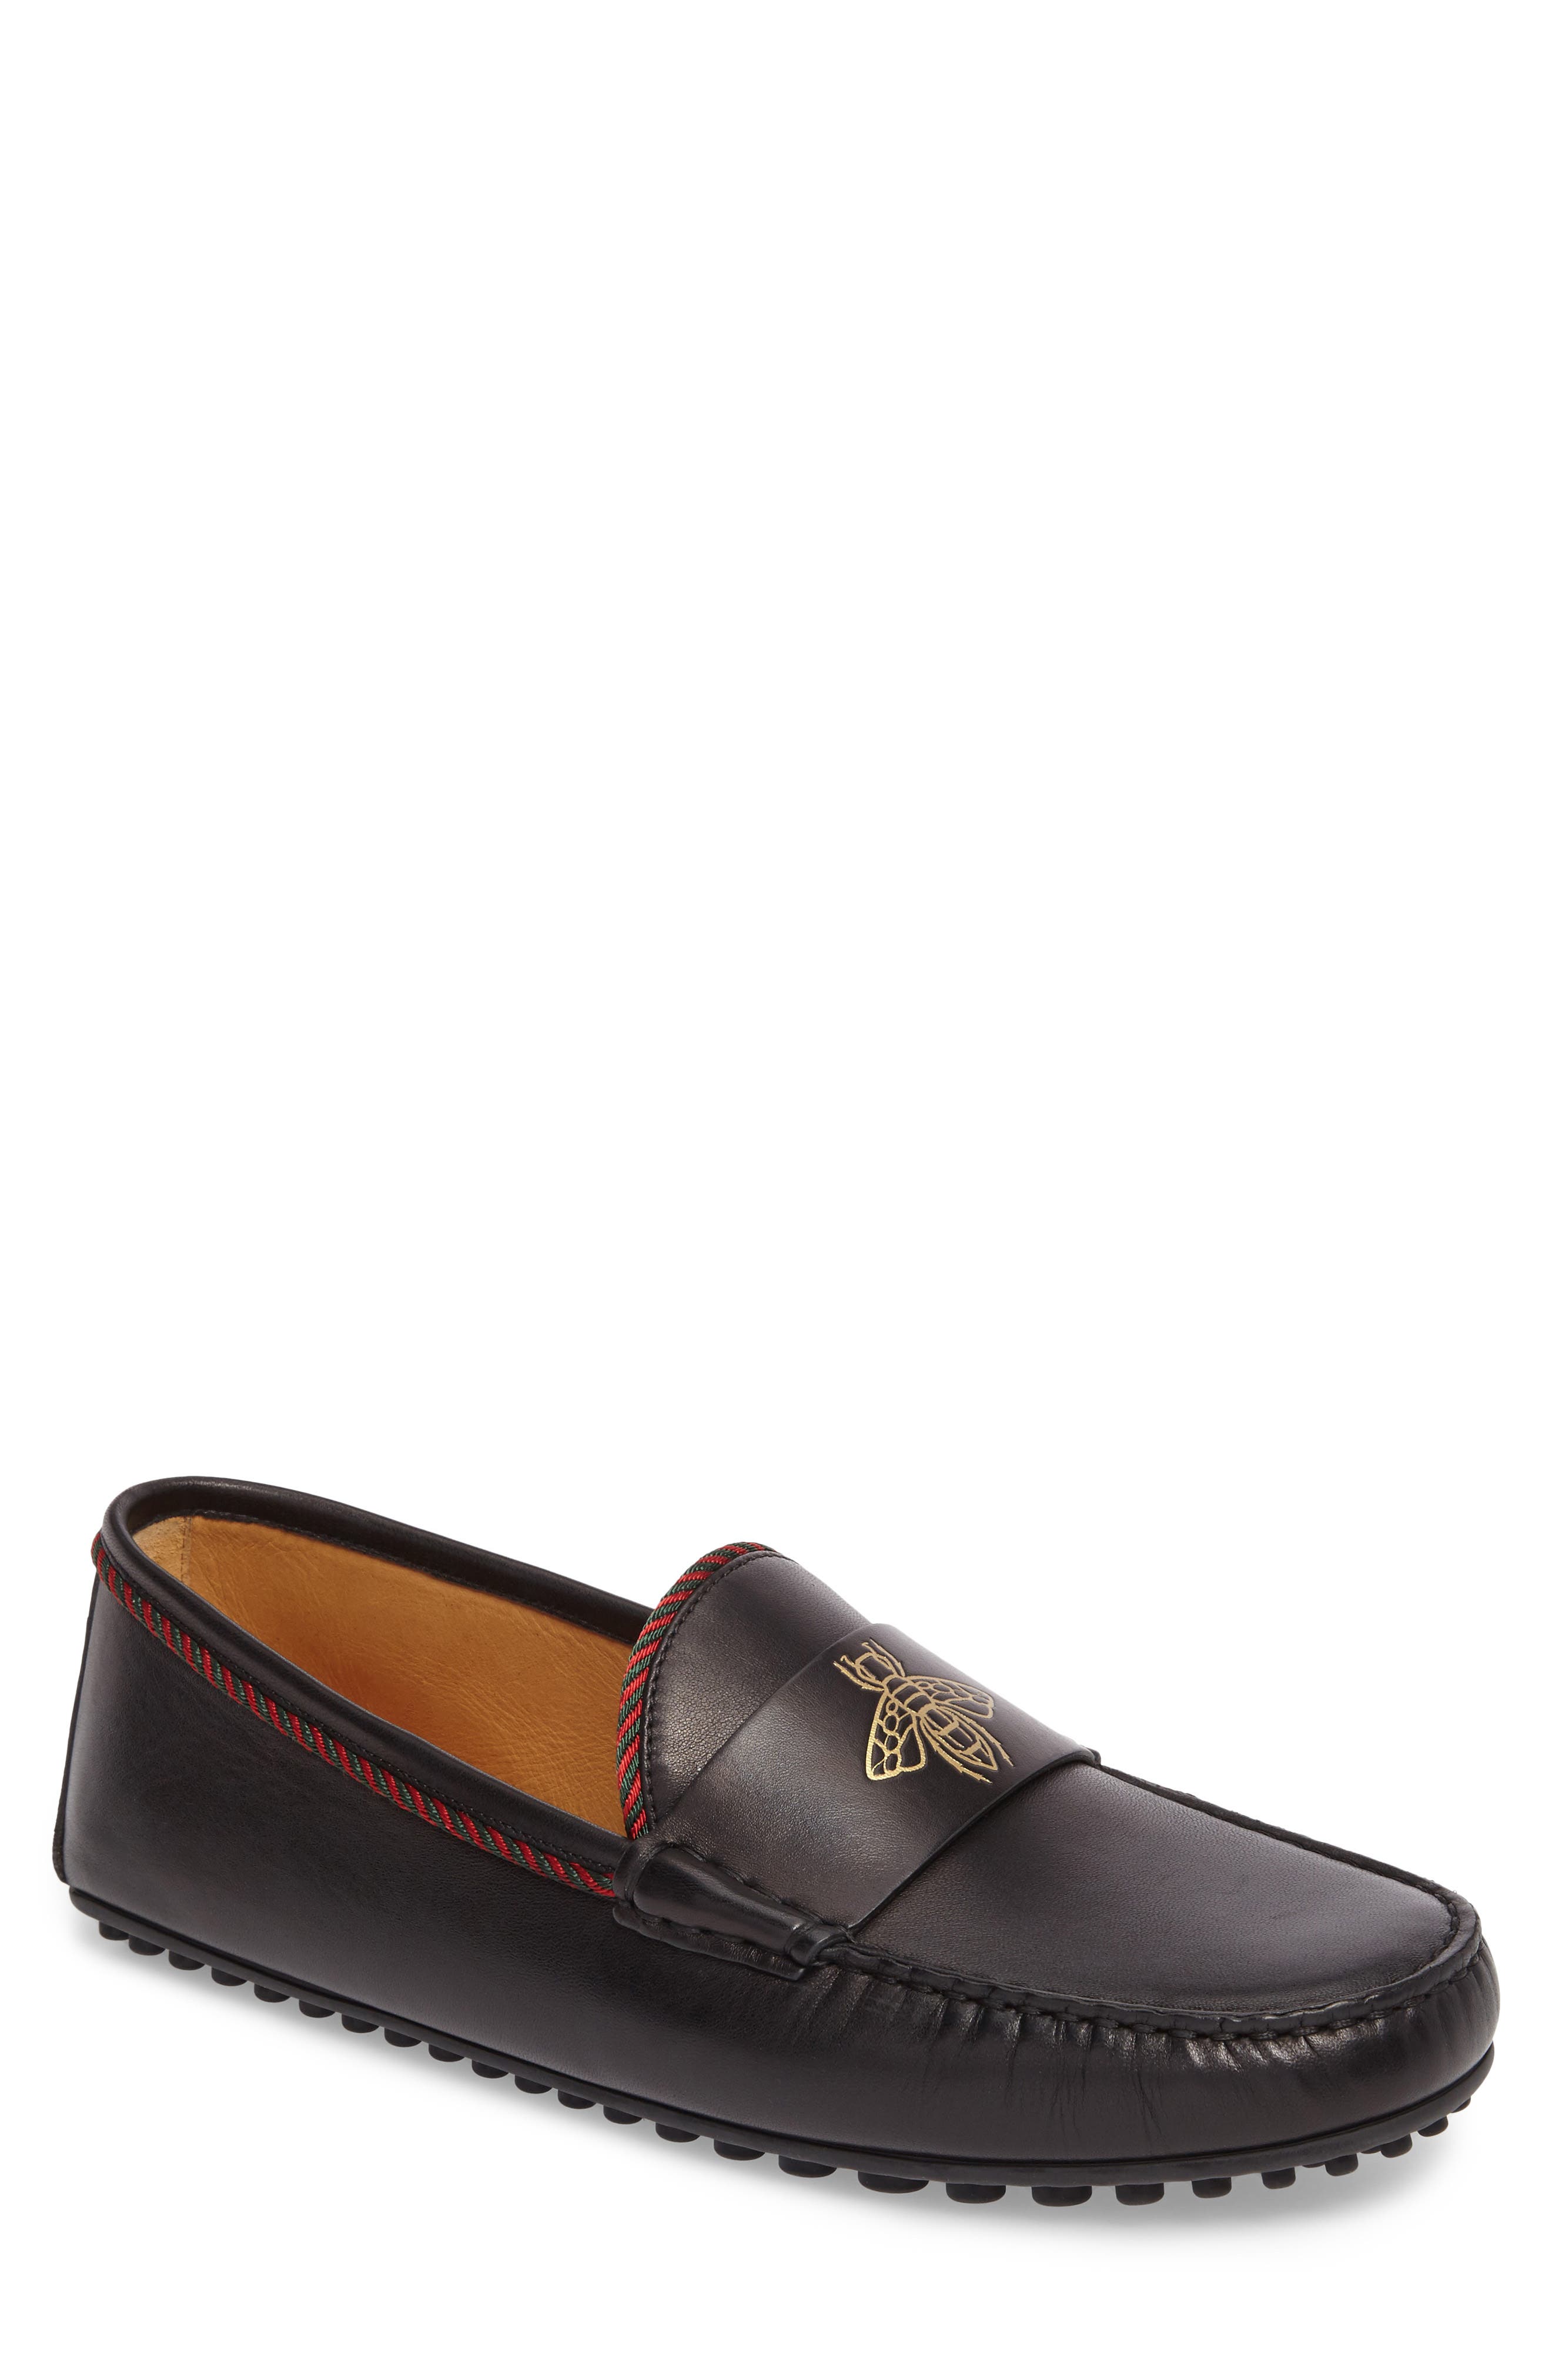 gucci bee loafers mens